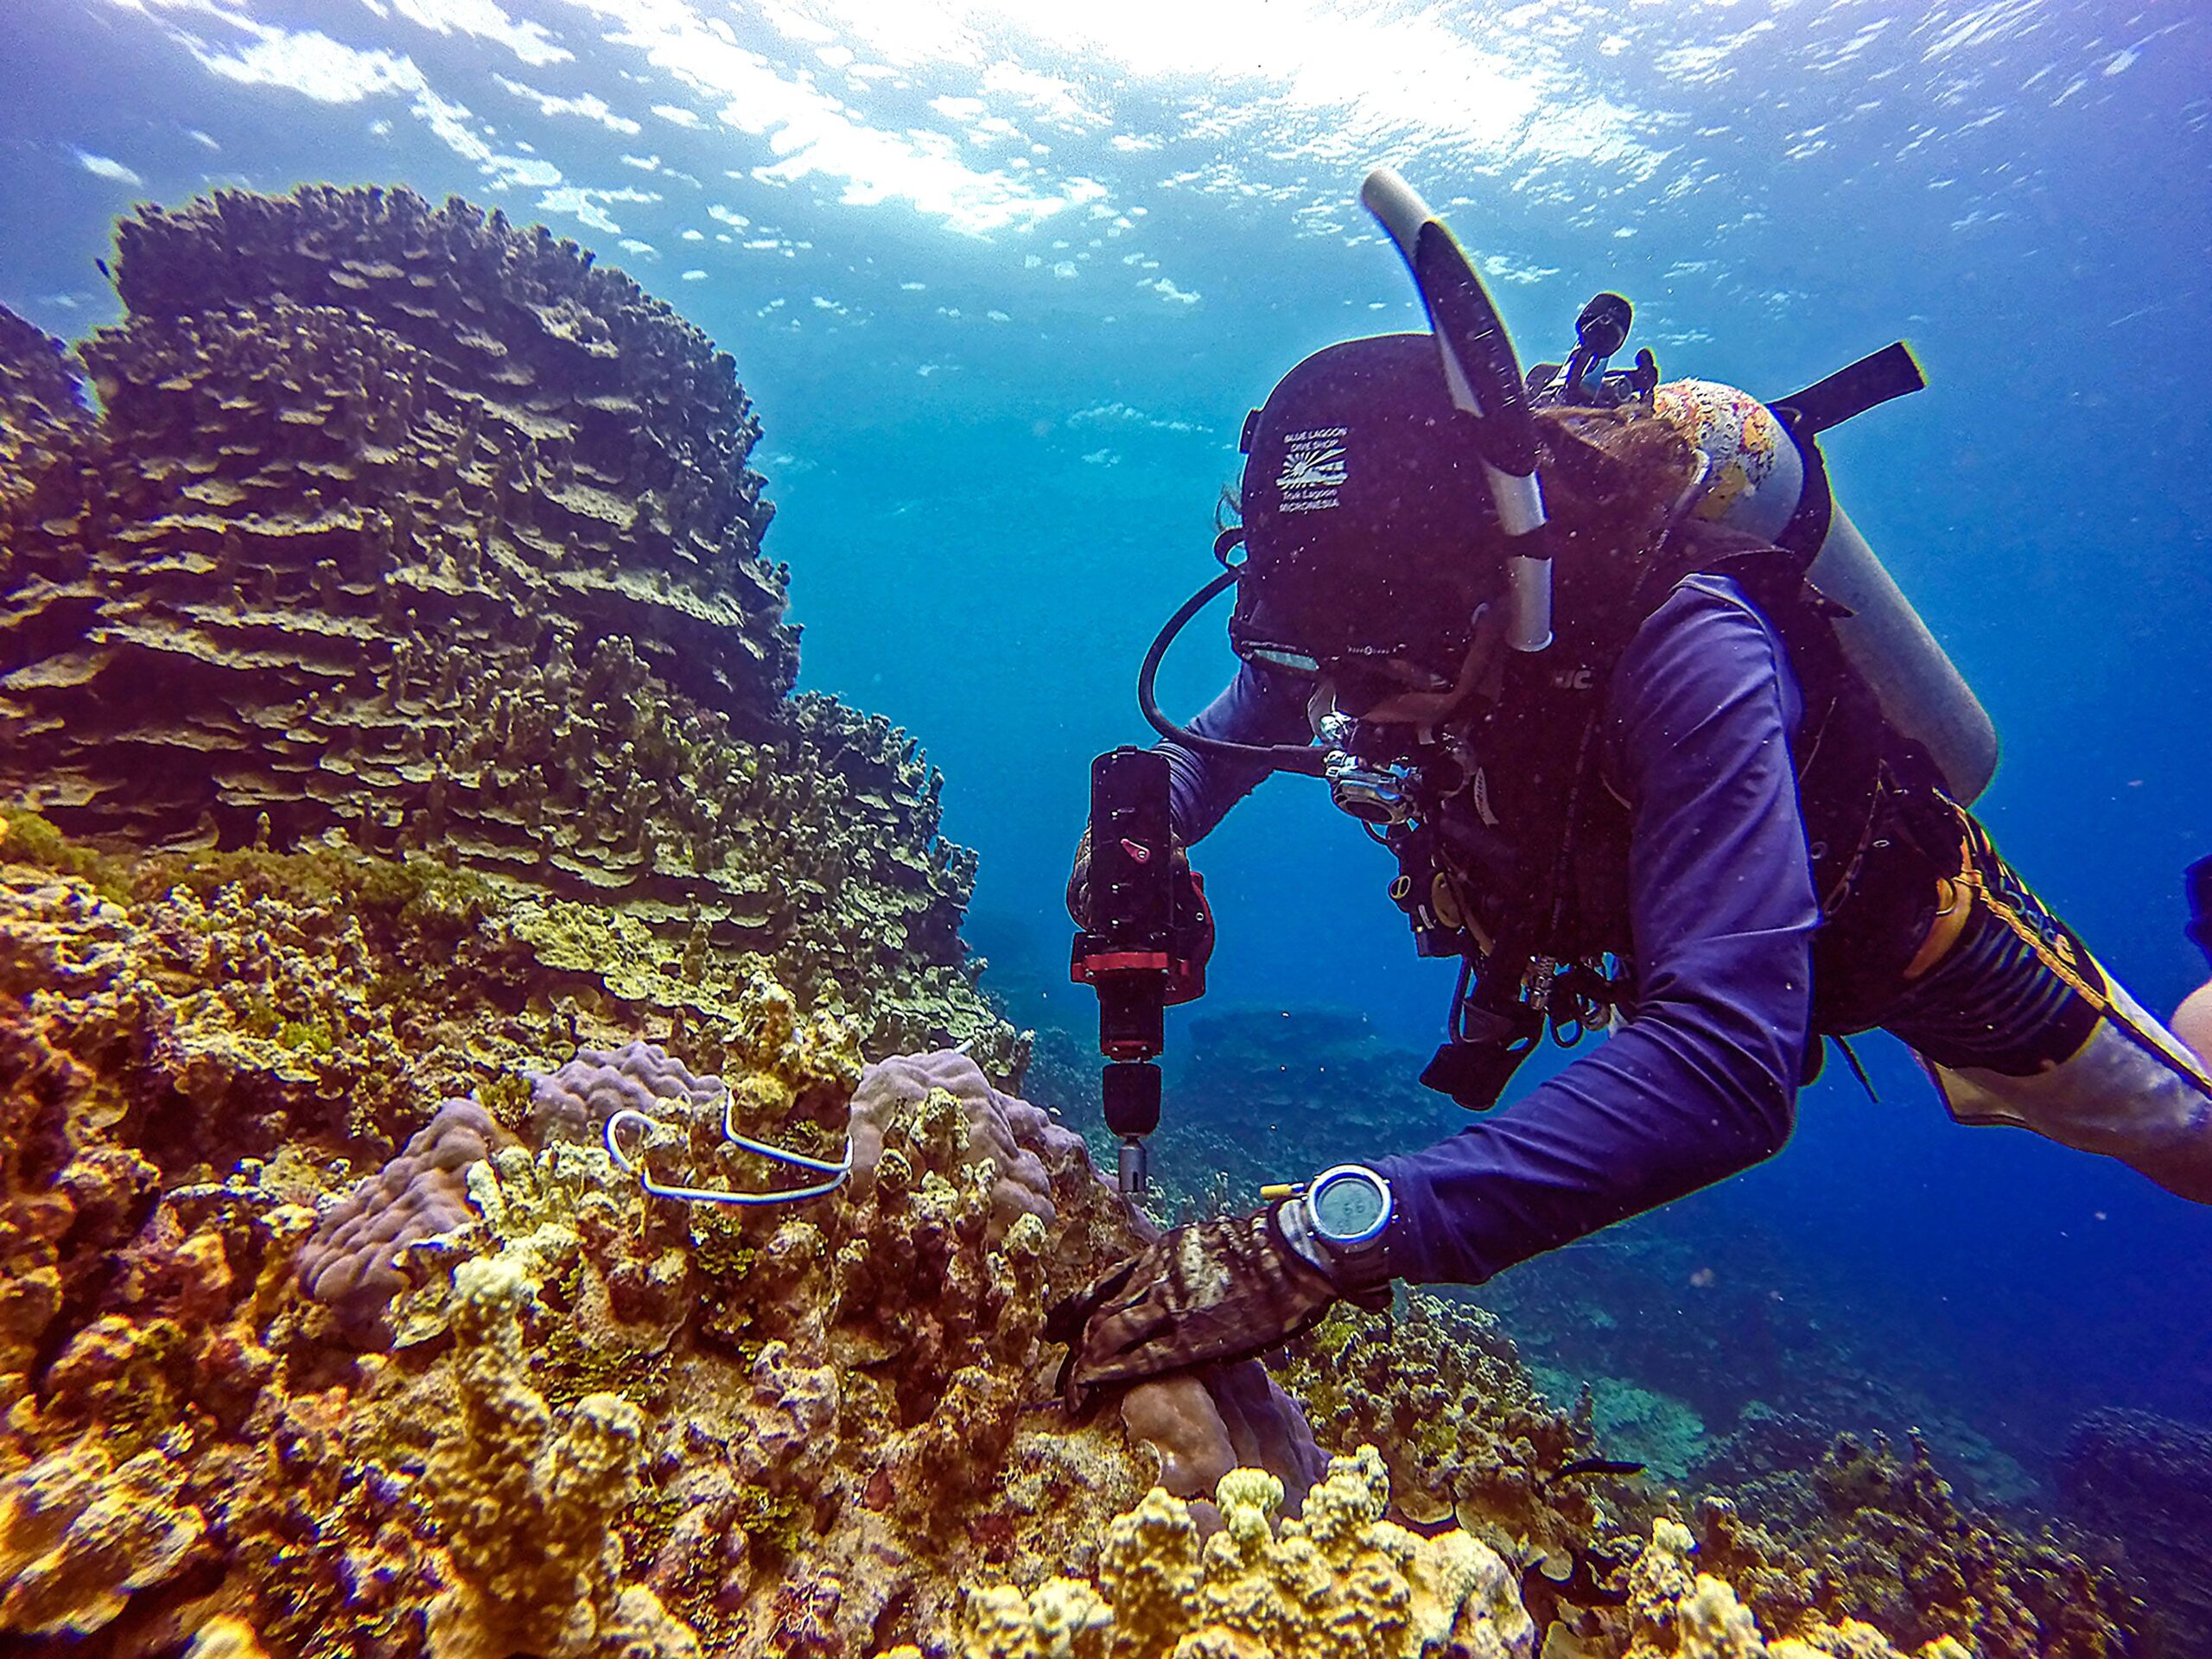 Can Cordless Tools Be Used for Underwater Construction Projects, And If So, Which Ones?